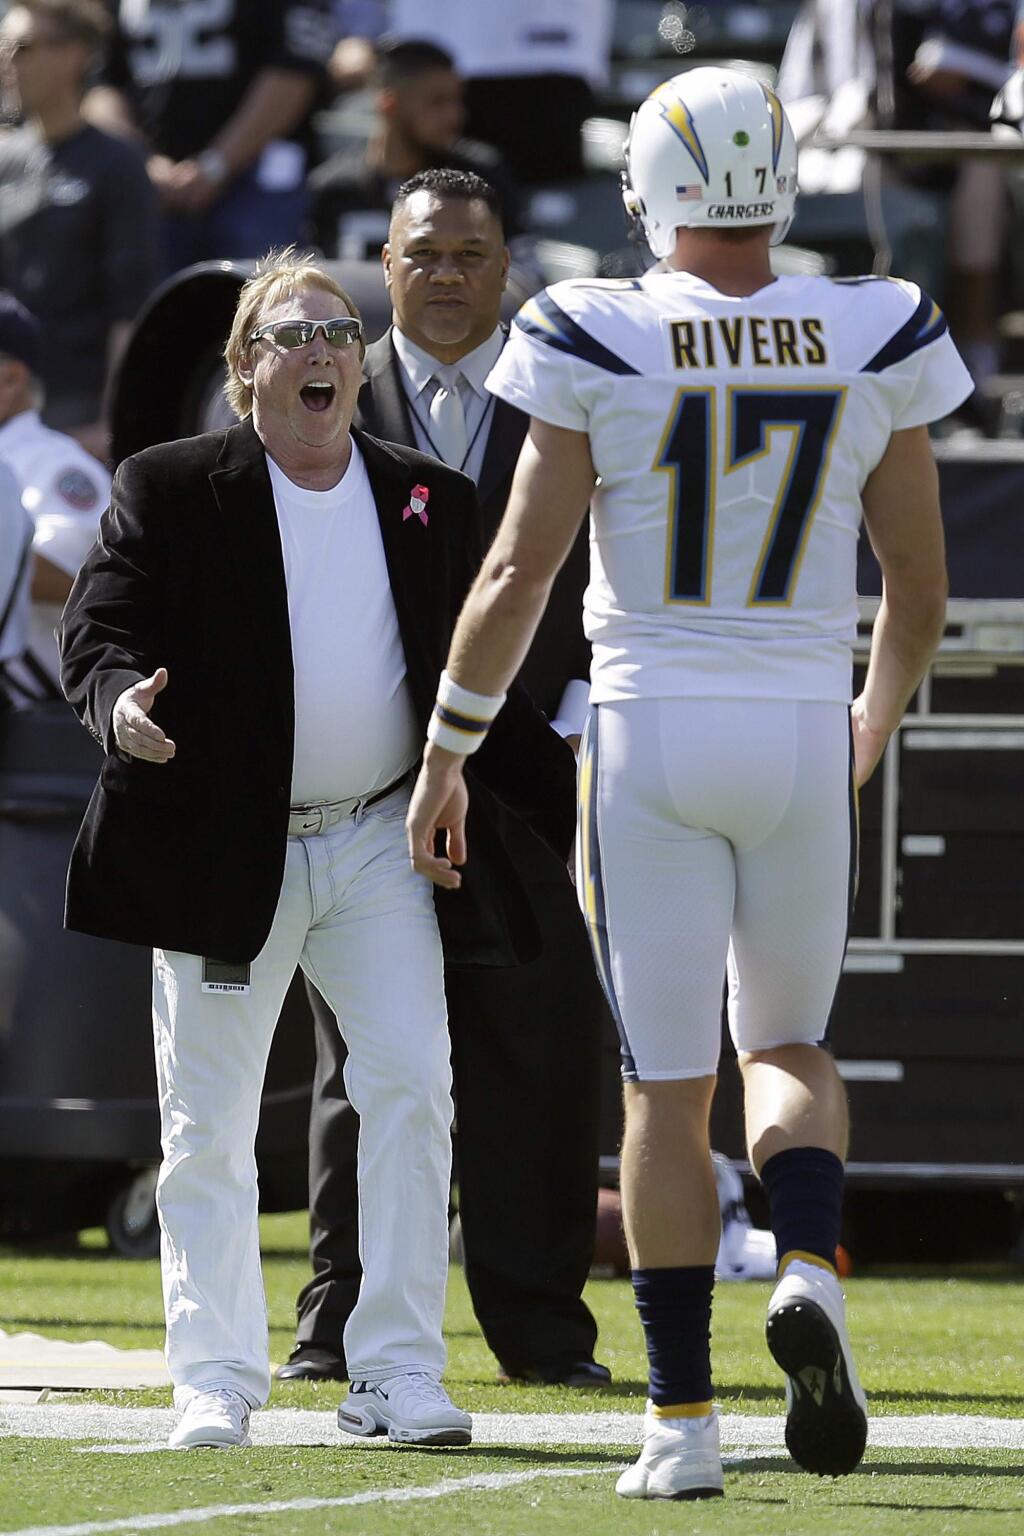 FILE - In this Oct. 15, 2017, file photo, Oakland Raiders owner Mark Davis, left, greets Los Angeles Chargers quarterback Philip Rivers (17) before an NFL football game between the Raiders and the Chargers in Oakland, Calif. From his first career start in 2006 to some riveting comebacks and crushing defeats, Chargers quarterback Philip Rivers has had plenty of memorable experiences playing against the Raiders at the Oakland Coliseum.So there will be a bit of nostalgia when Rivers plays his final scheduled game there Thursday night, Nov. 17, 2019, when the Chargers (4-5) take on the Raiders (4-4) in a game crucial for both teams' playoff hopes. (AP Photo/Ben Margot, File)